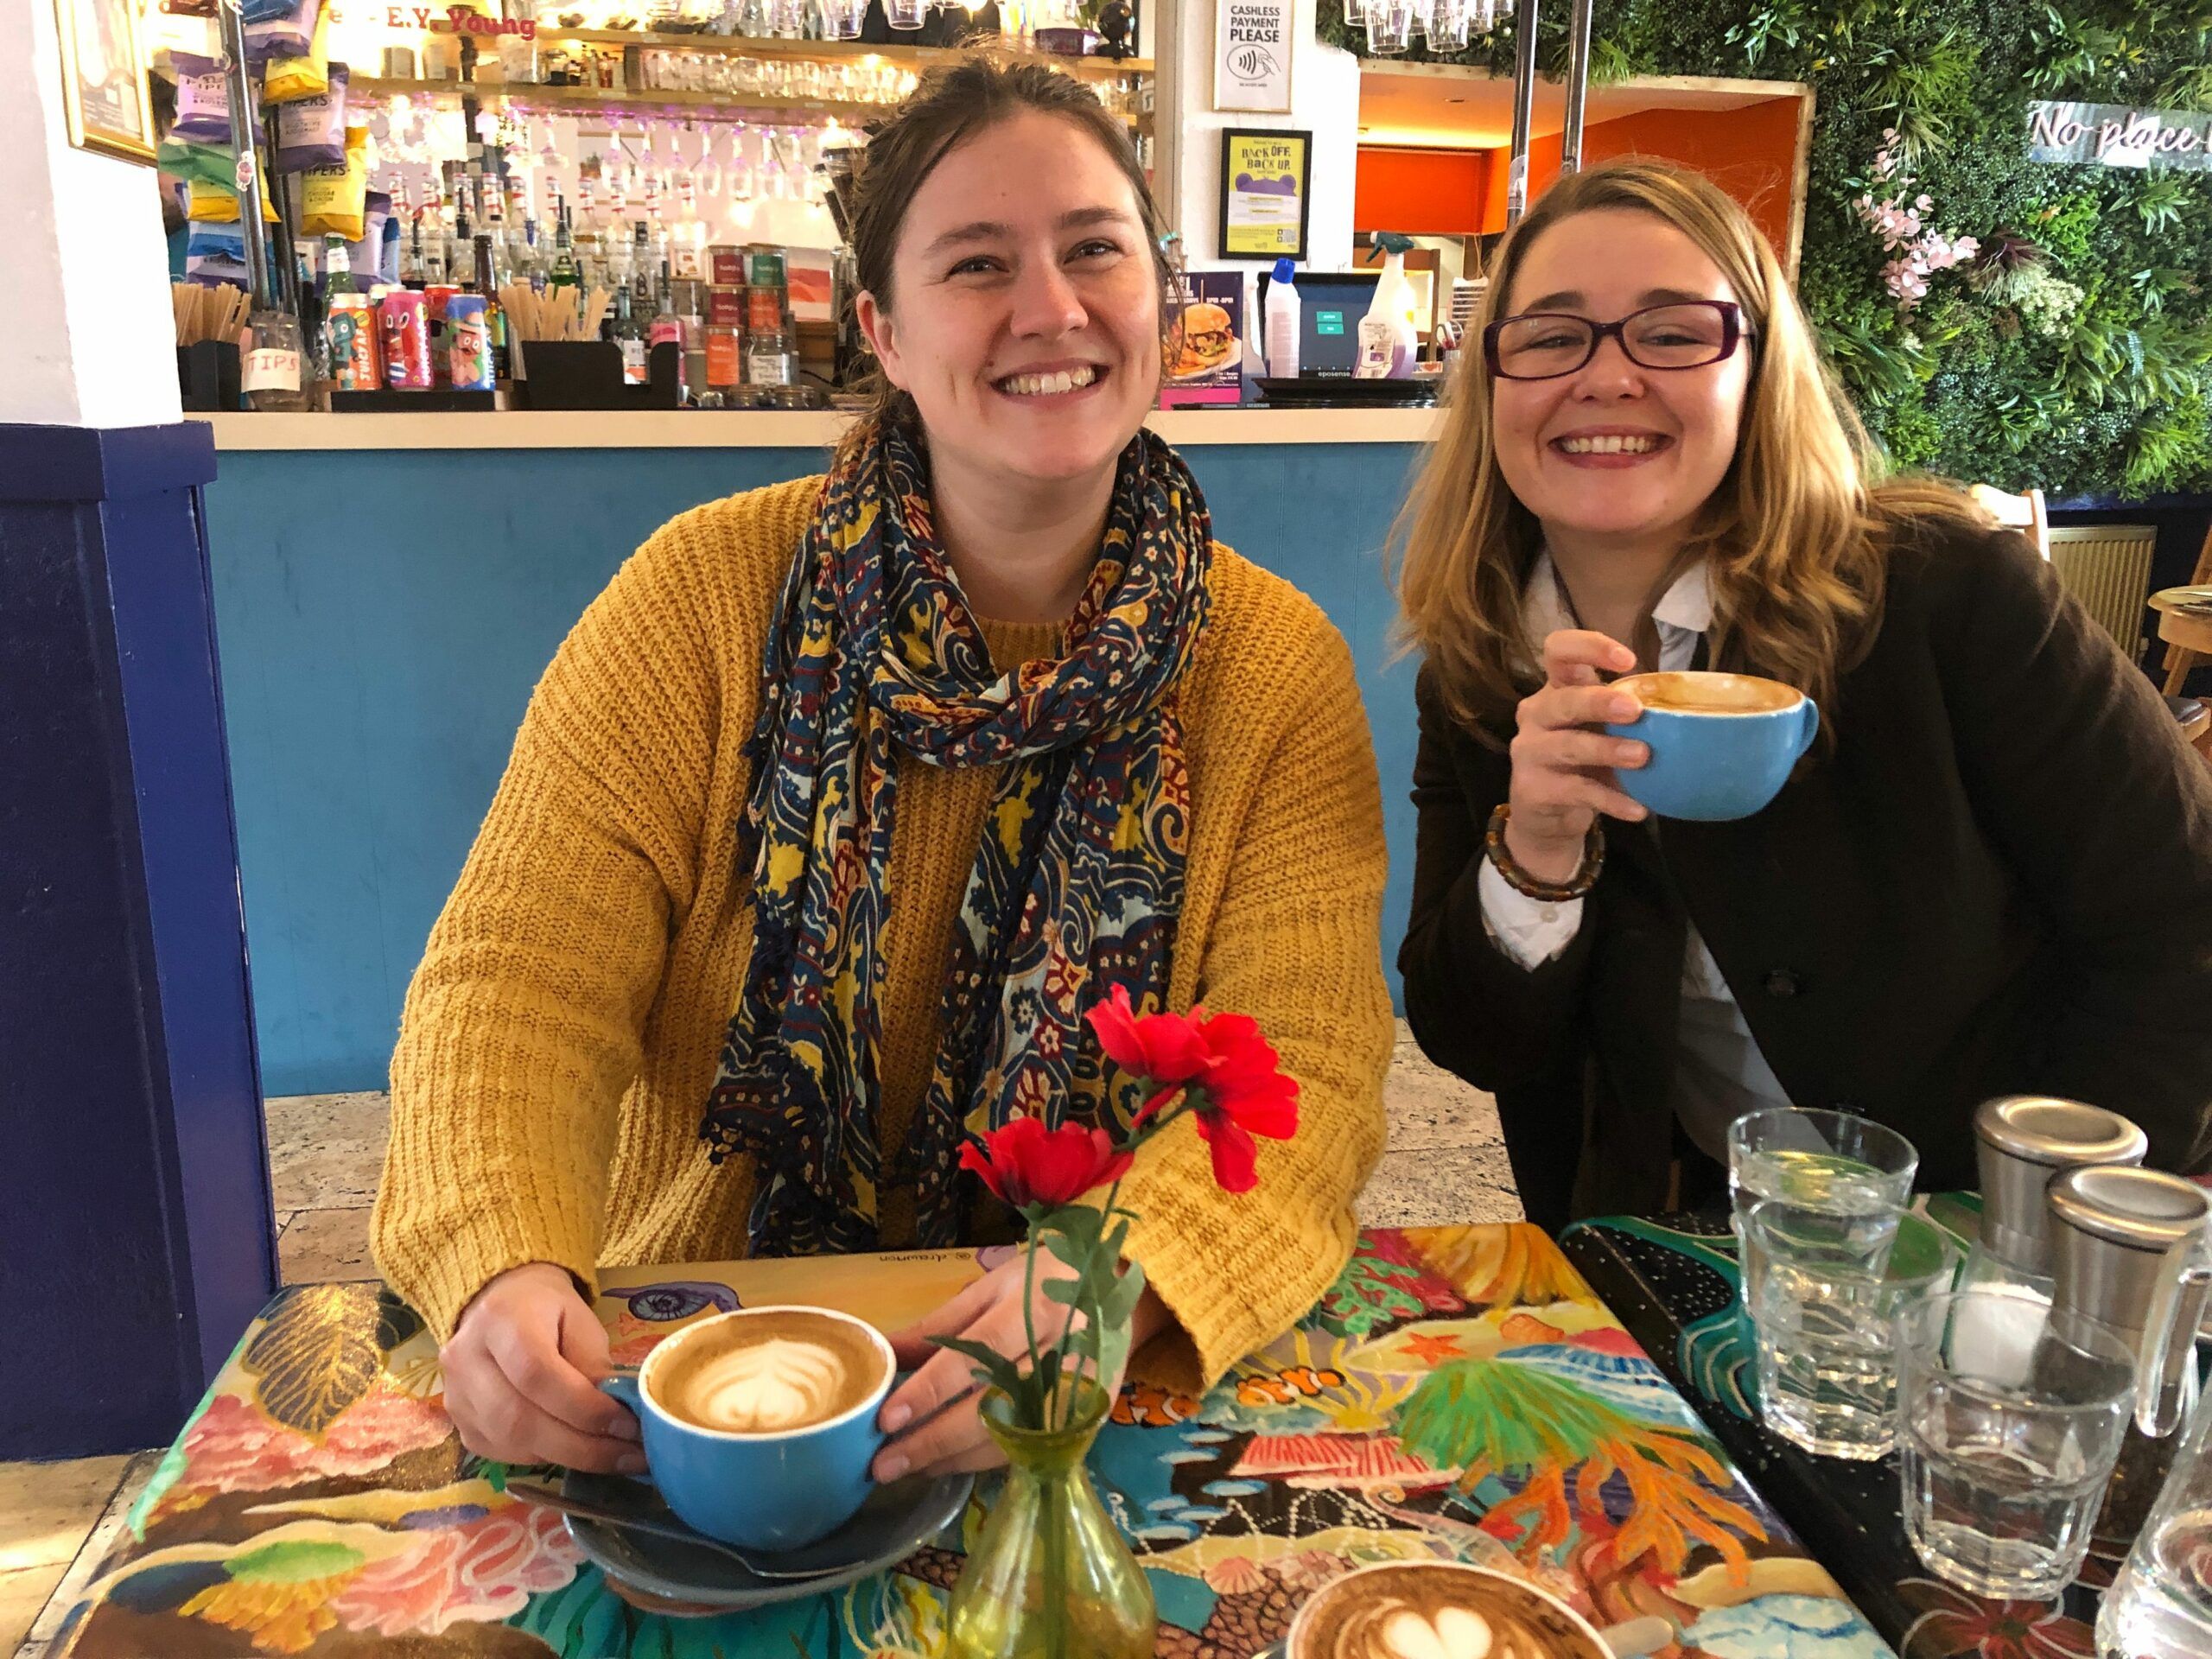 Megan and her friend enjoying their coffees at Arcobaleno. No Brunch like Arco